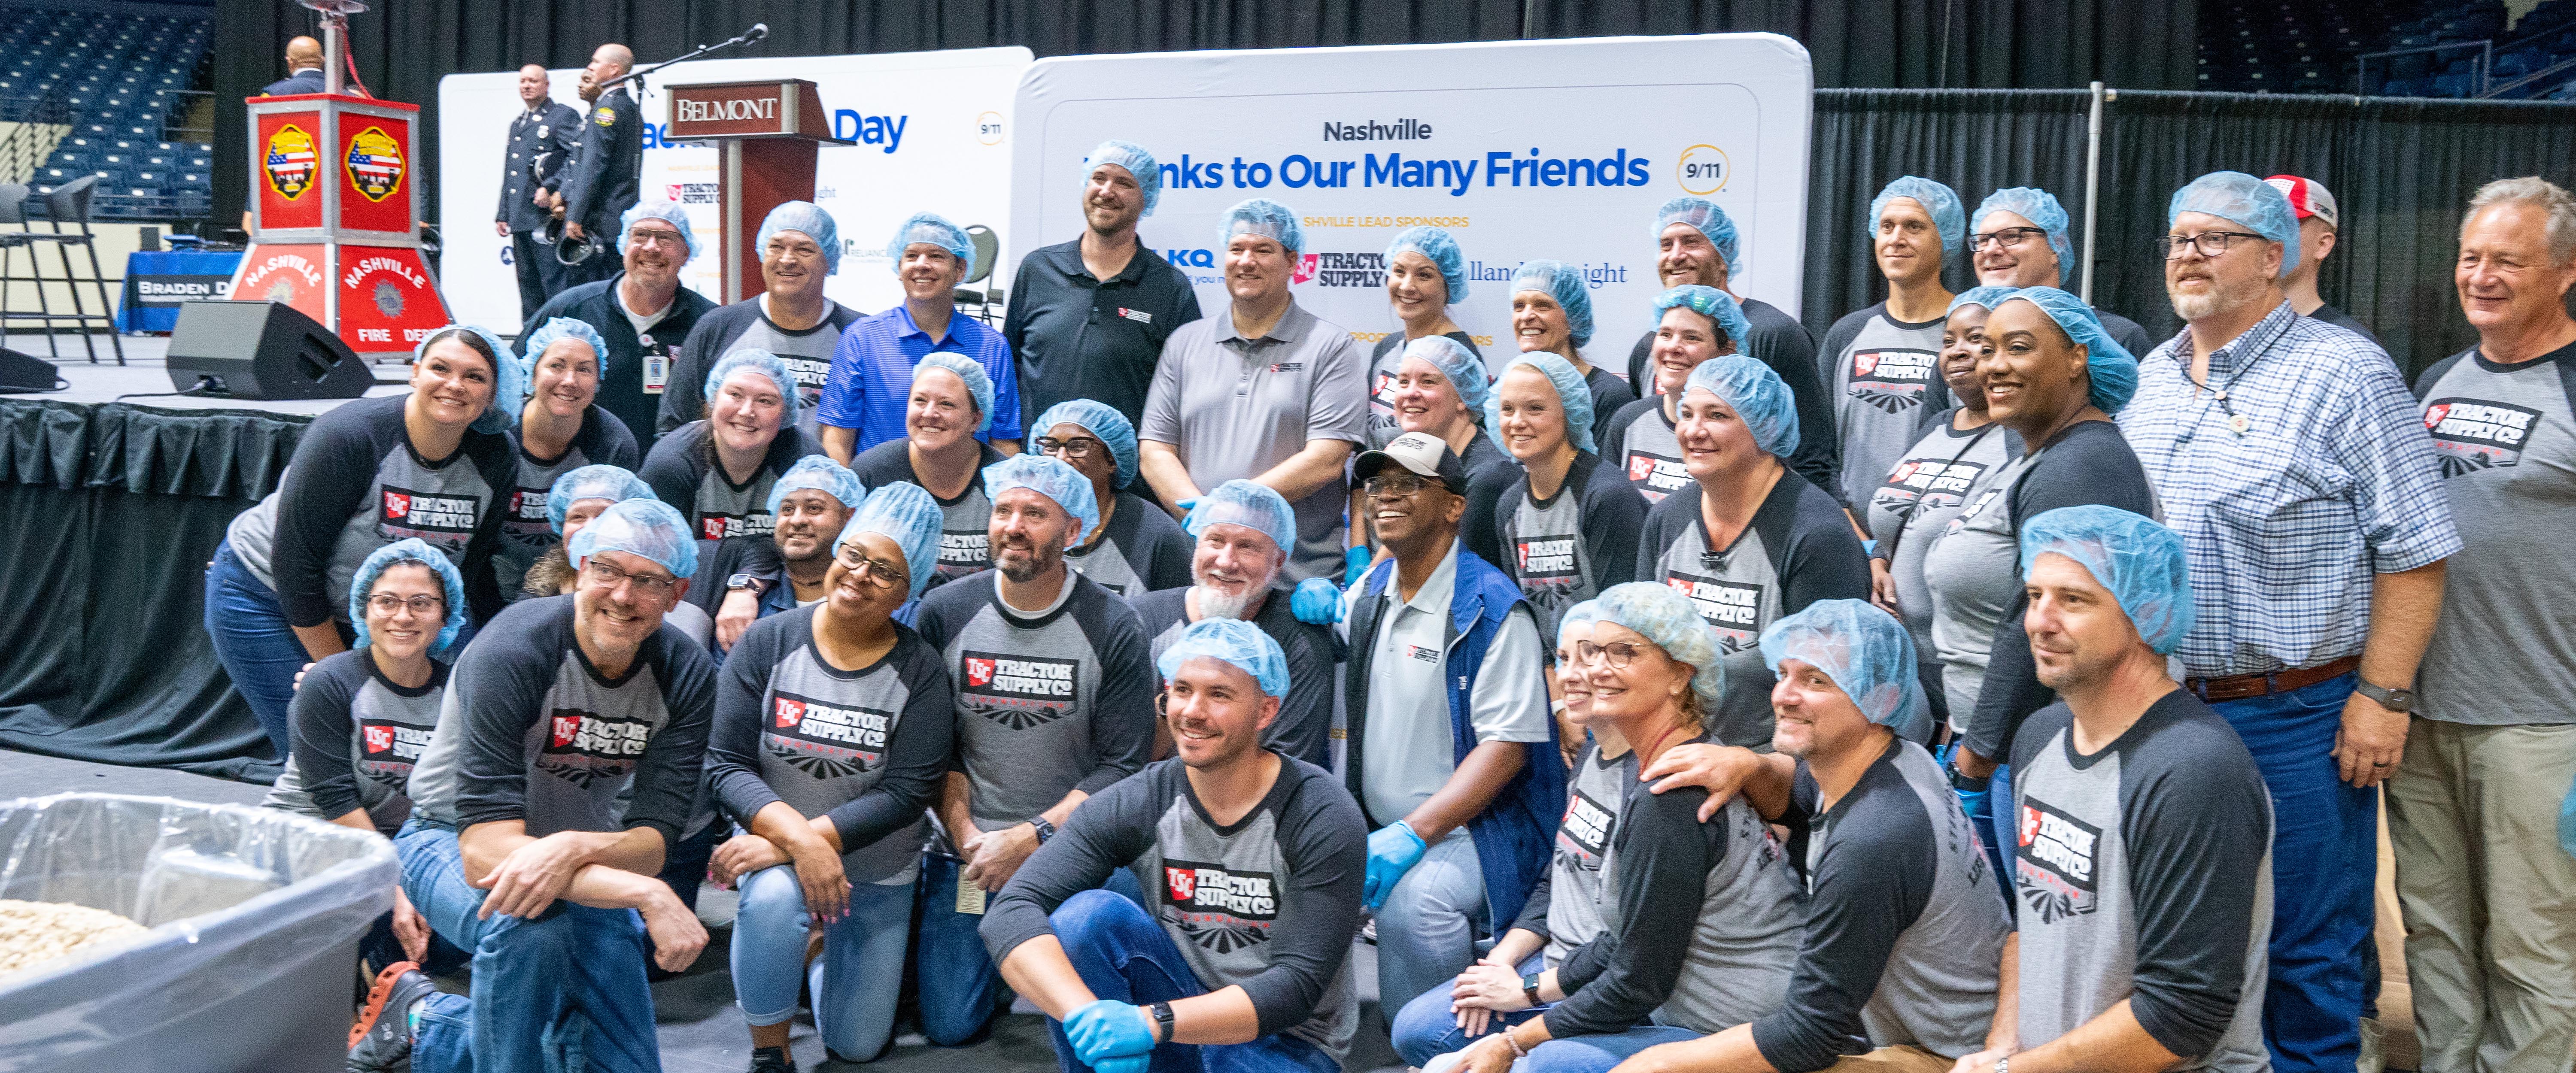 Belmont faculty and staff pose for a picture in hair nets and matching tshirts during Meal Pack for 9/11 Day.